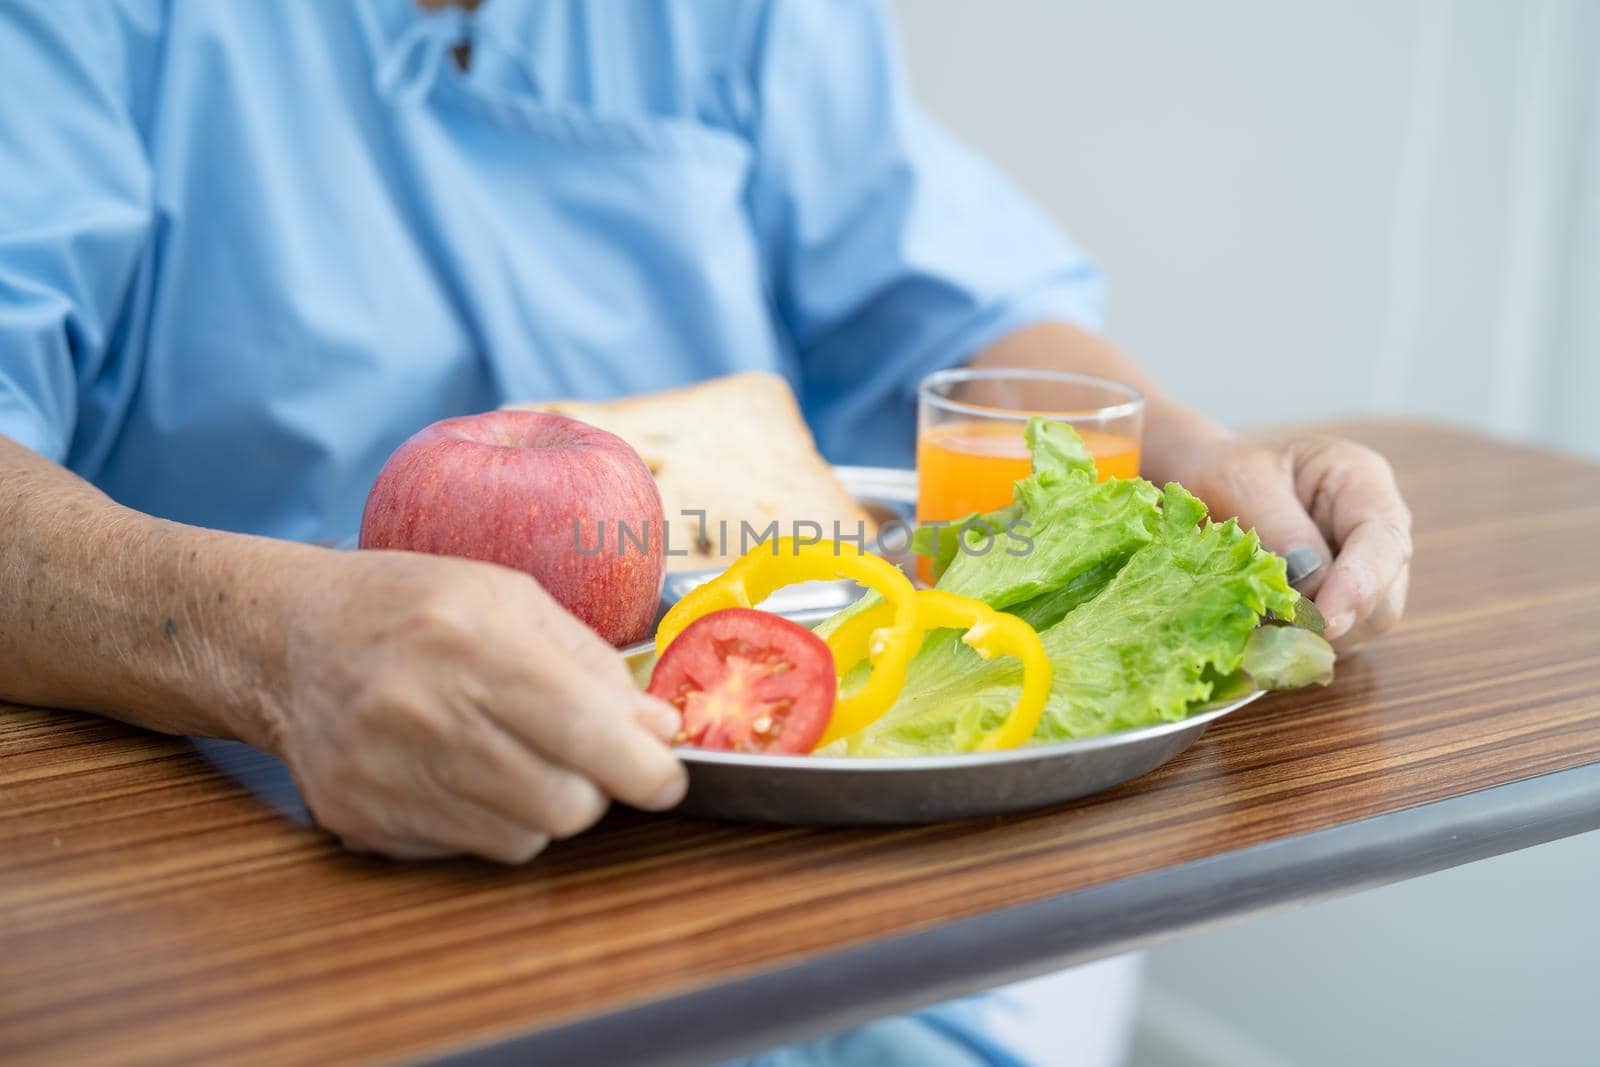 Asian senior or elderly old lady woman patient eating breakfast vegetable healthy food with hope and happy while sitting and hungry on bed in hospital.